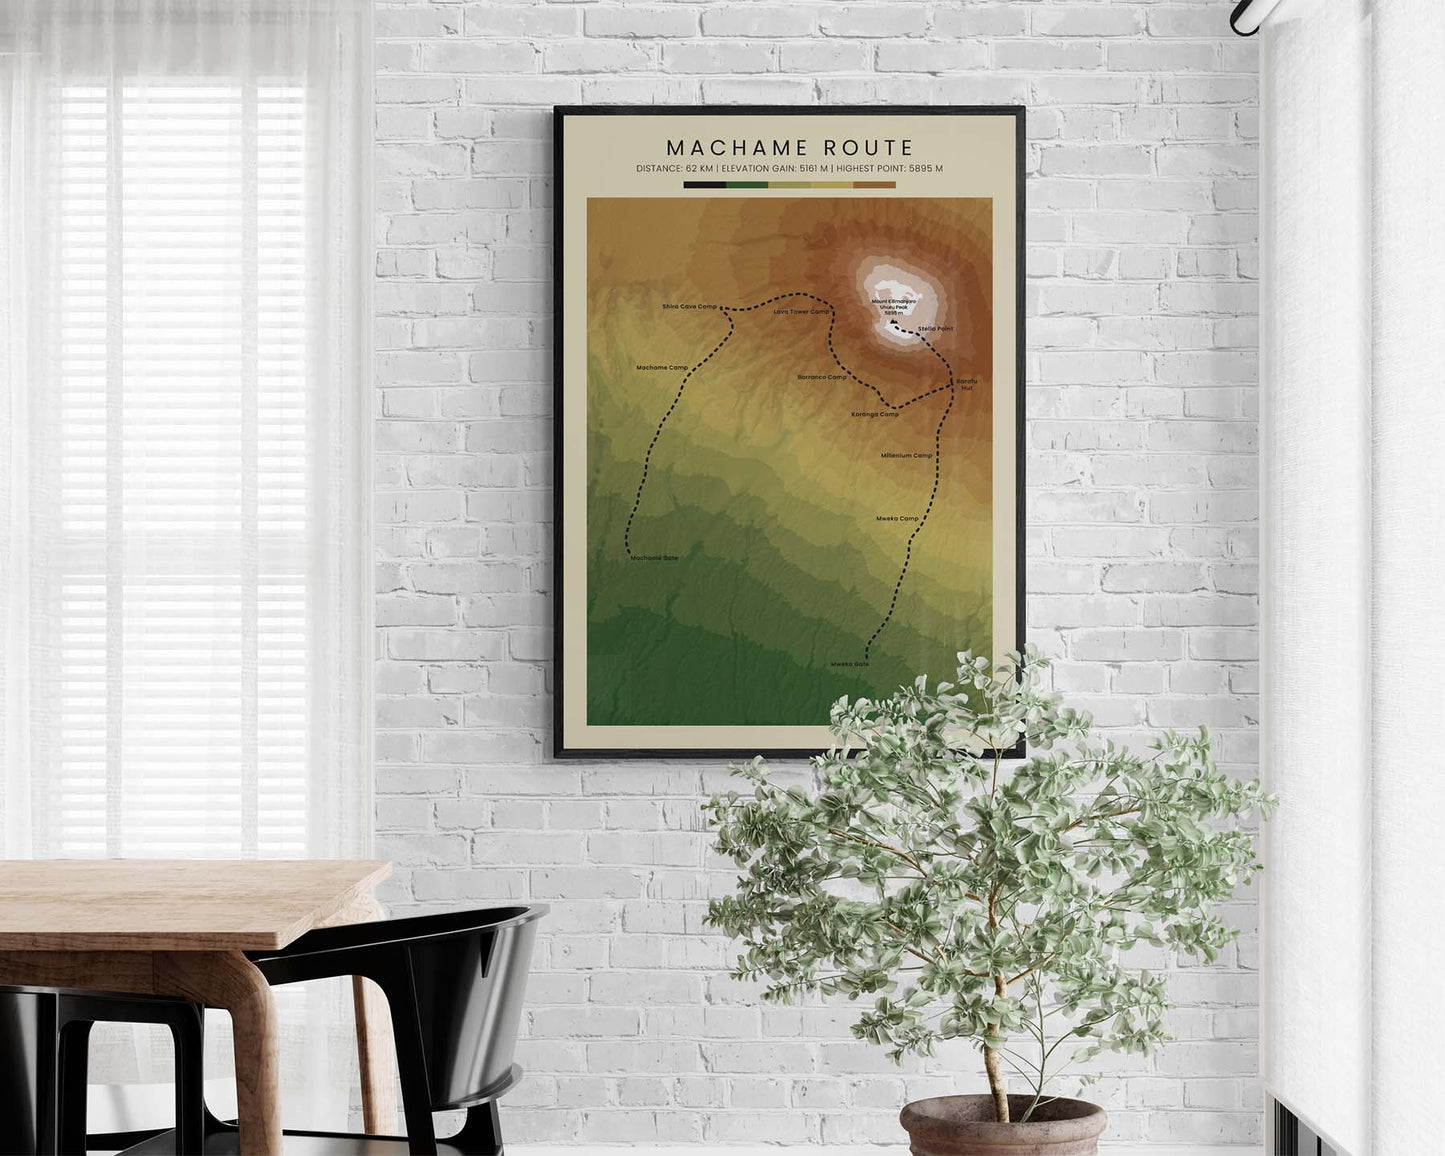 Machame Mount Kilimanjaro Trek (Africa) Hike Poster with Topographic Map in Modern Dining Room Decor